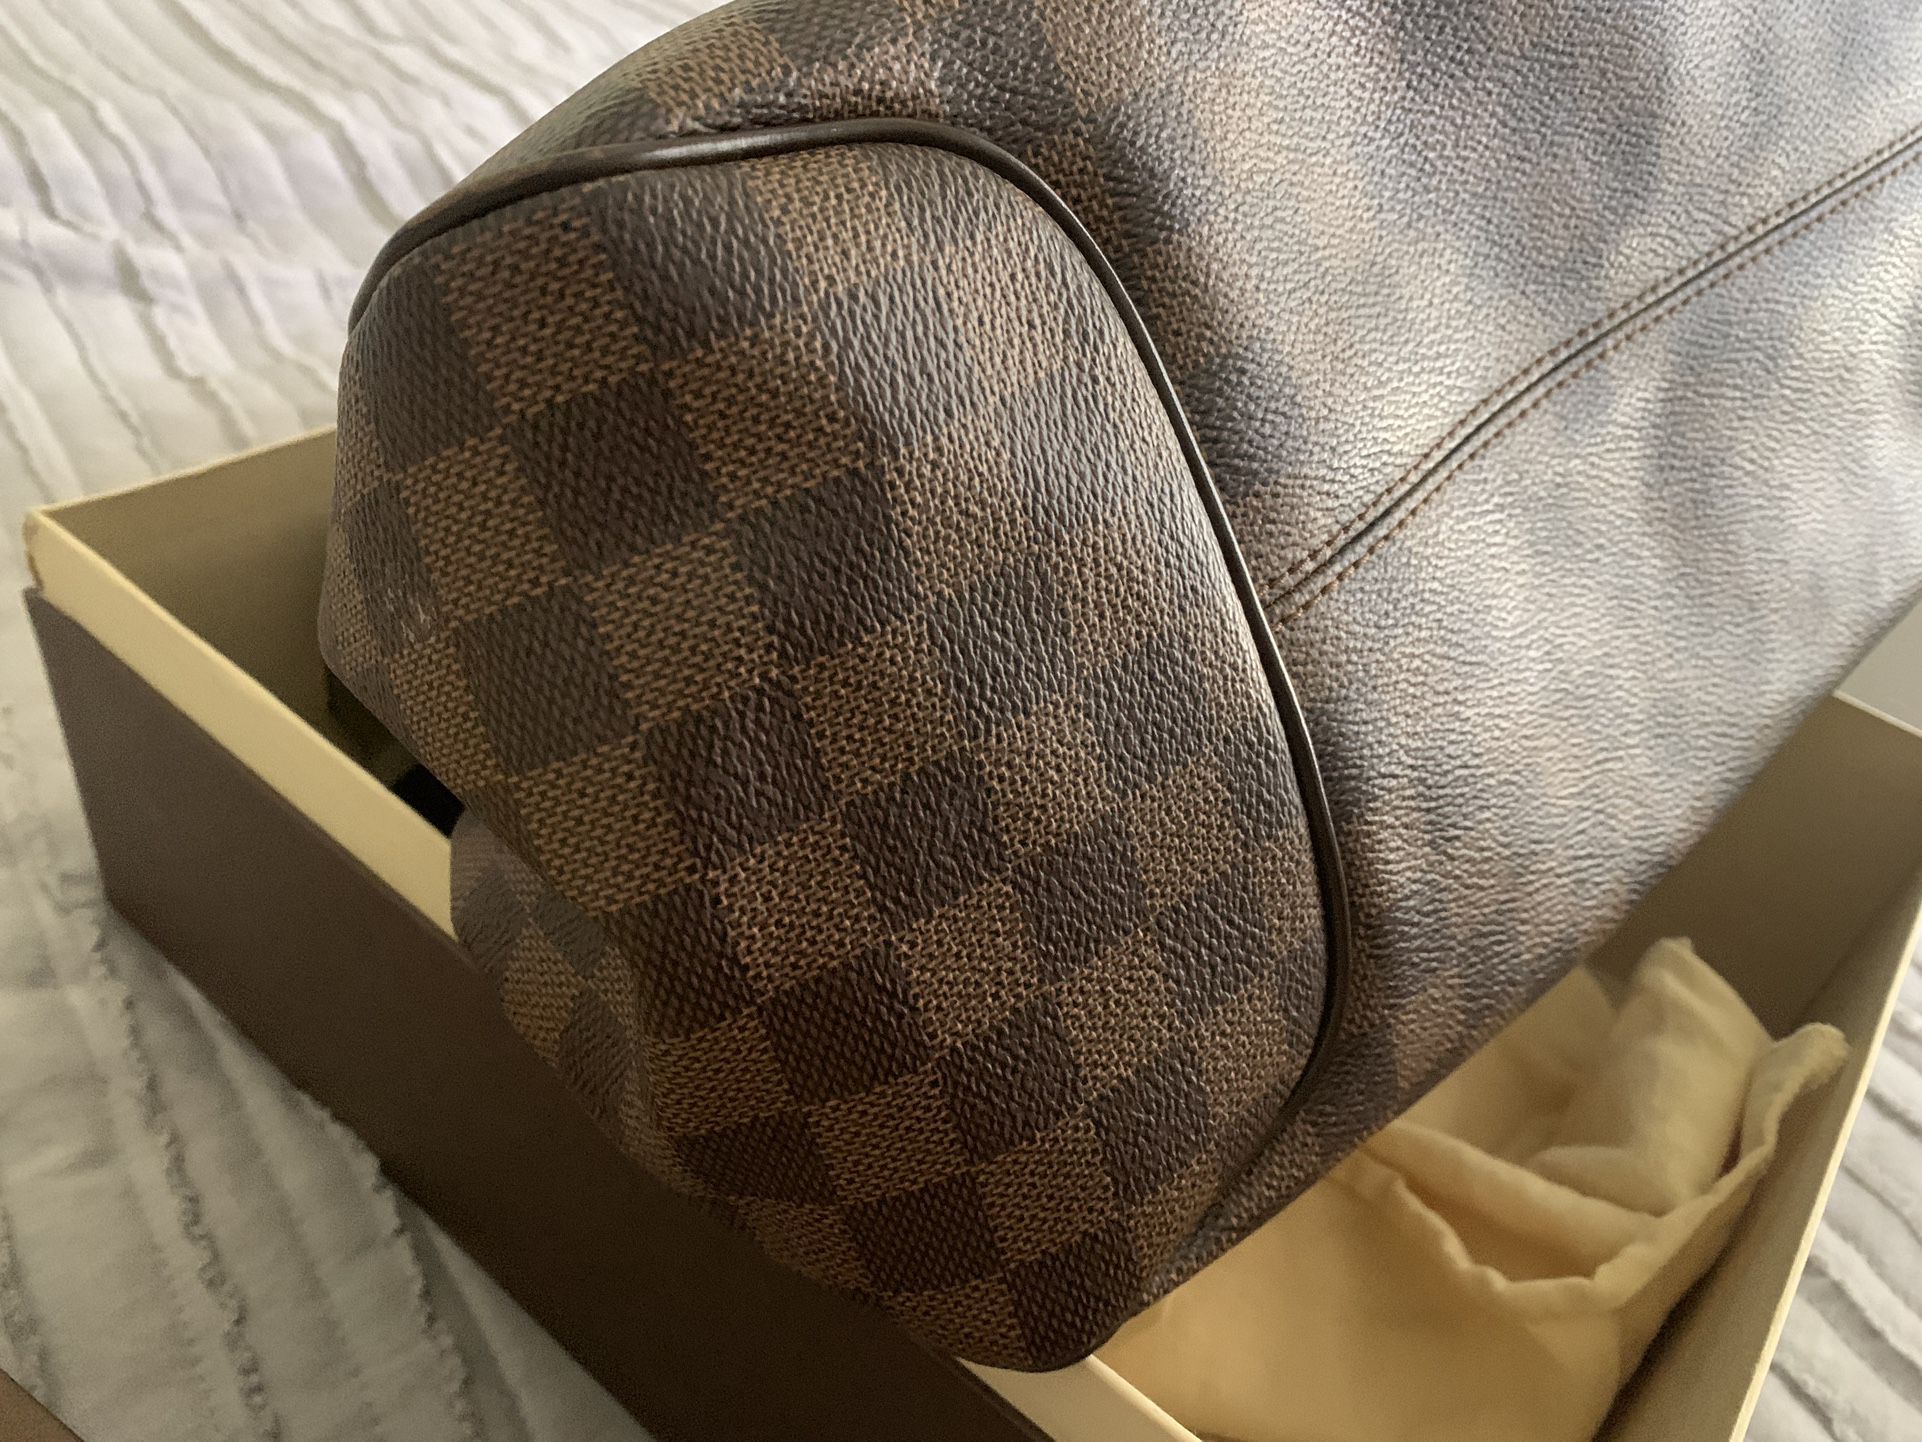 Louis Vuitton Caissa Hobo - Like New! Cherry Damier Ebene - Authentic for  Sale in Waddell, AZ - OfferUp